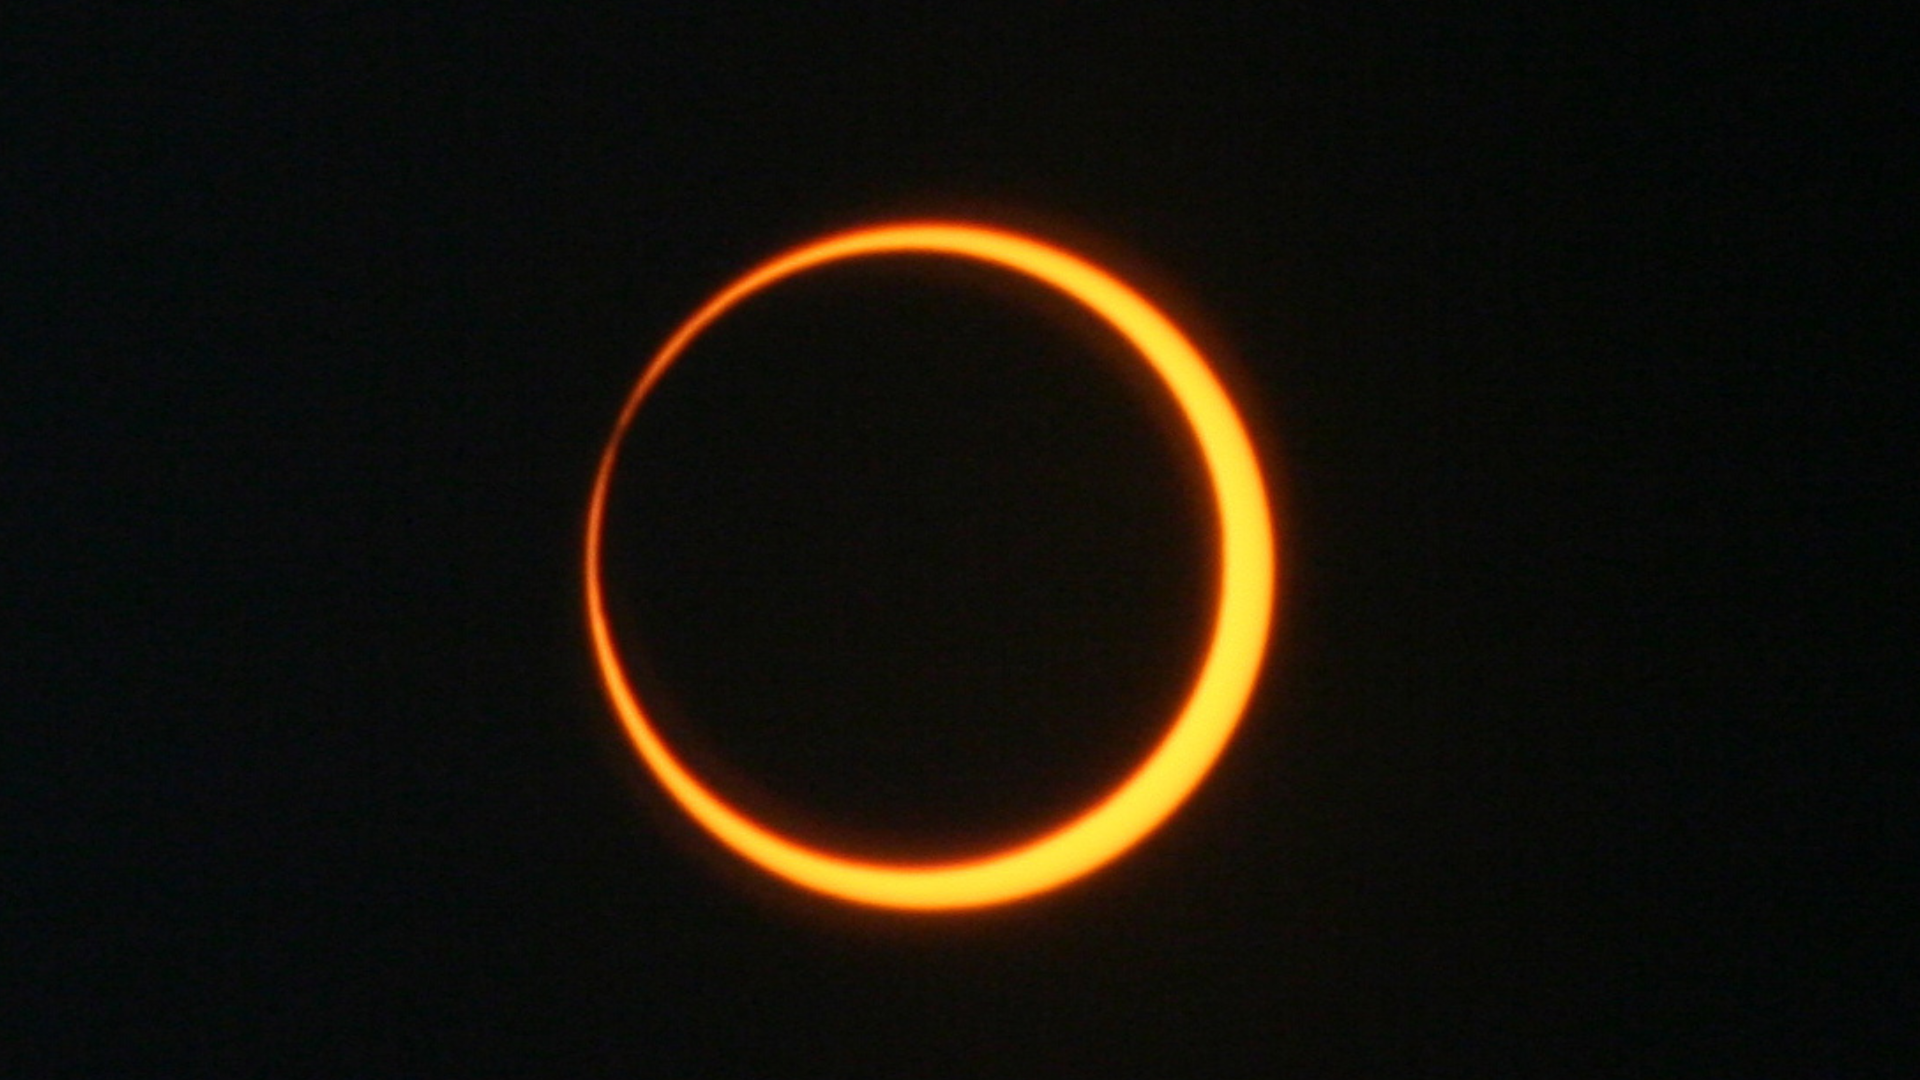 ‘Ring of fire’ solar eclipse on Oct. 14: Will the weather cooperate? Space